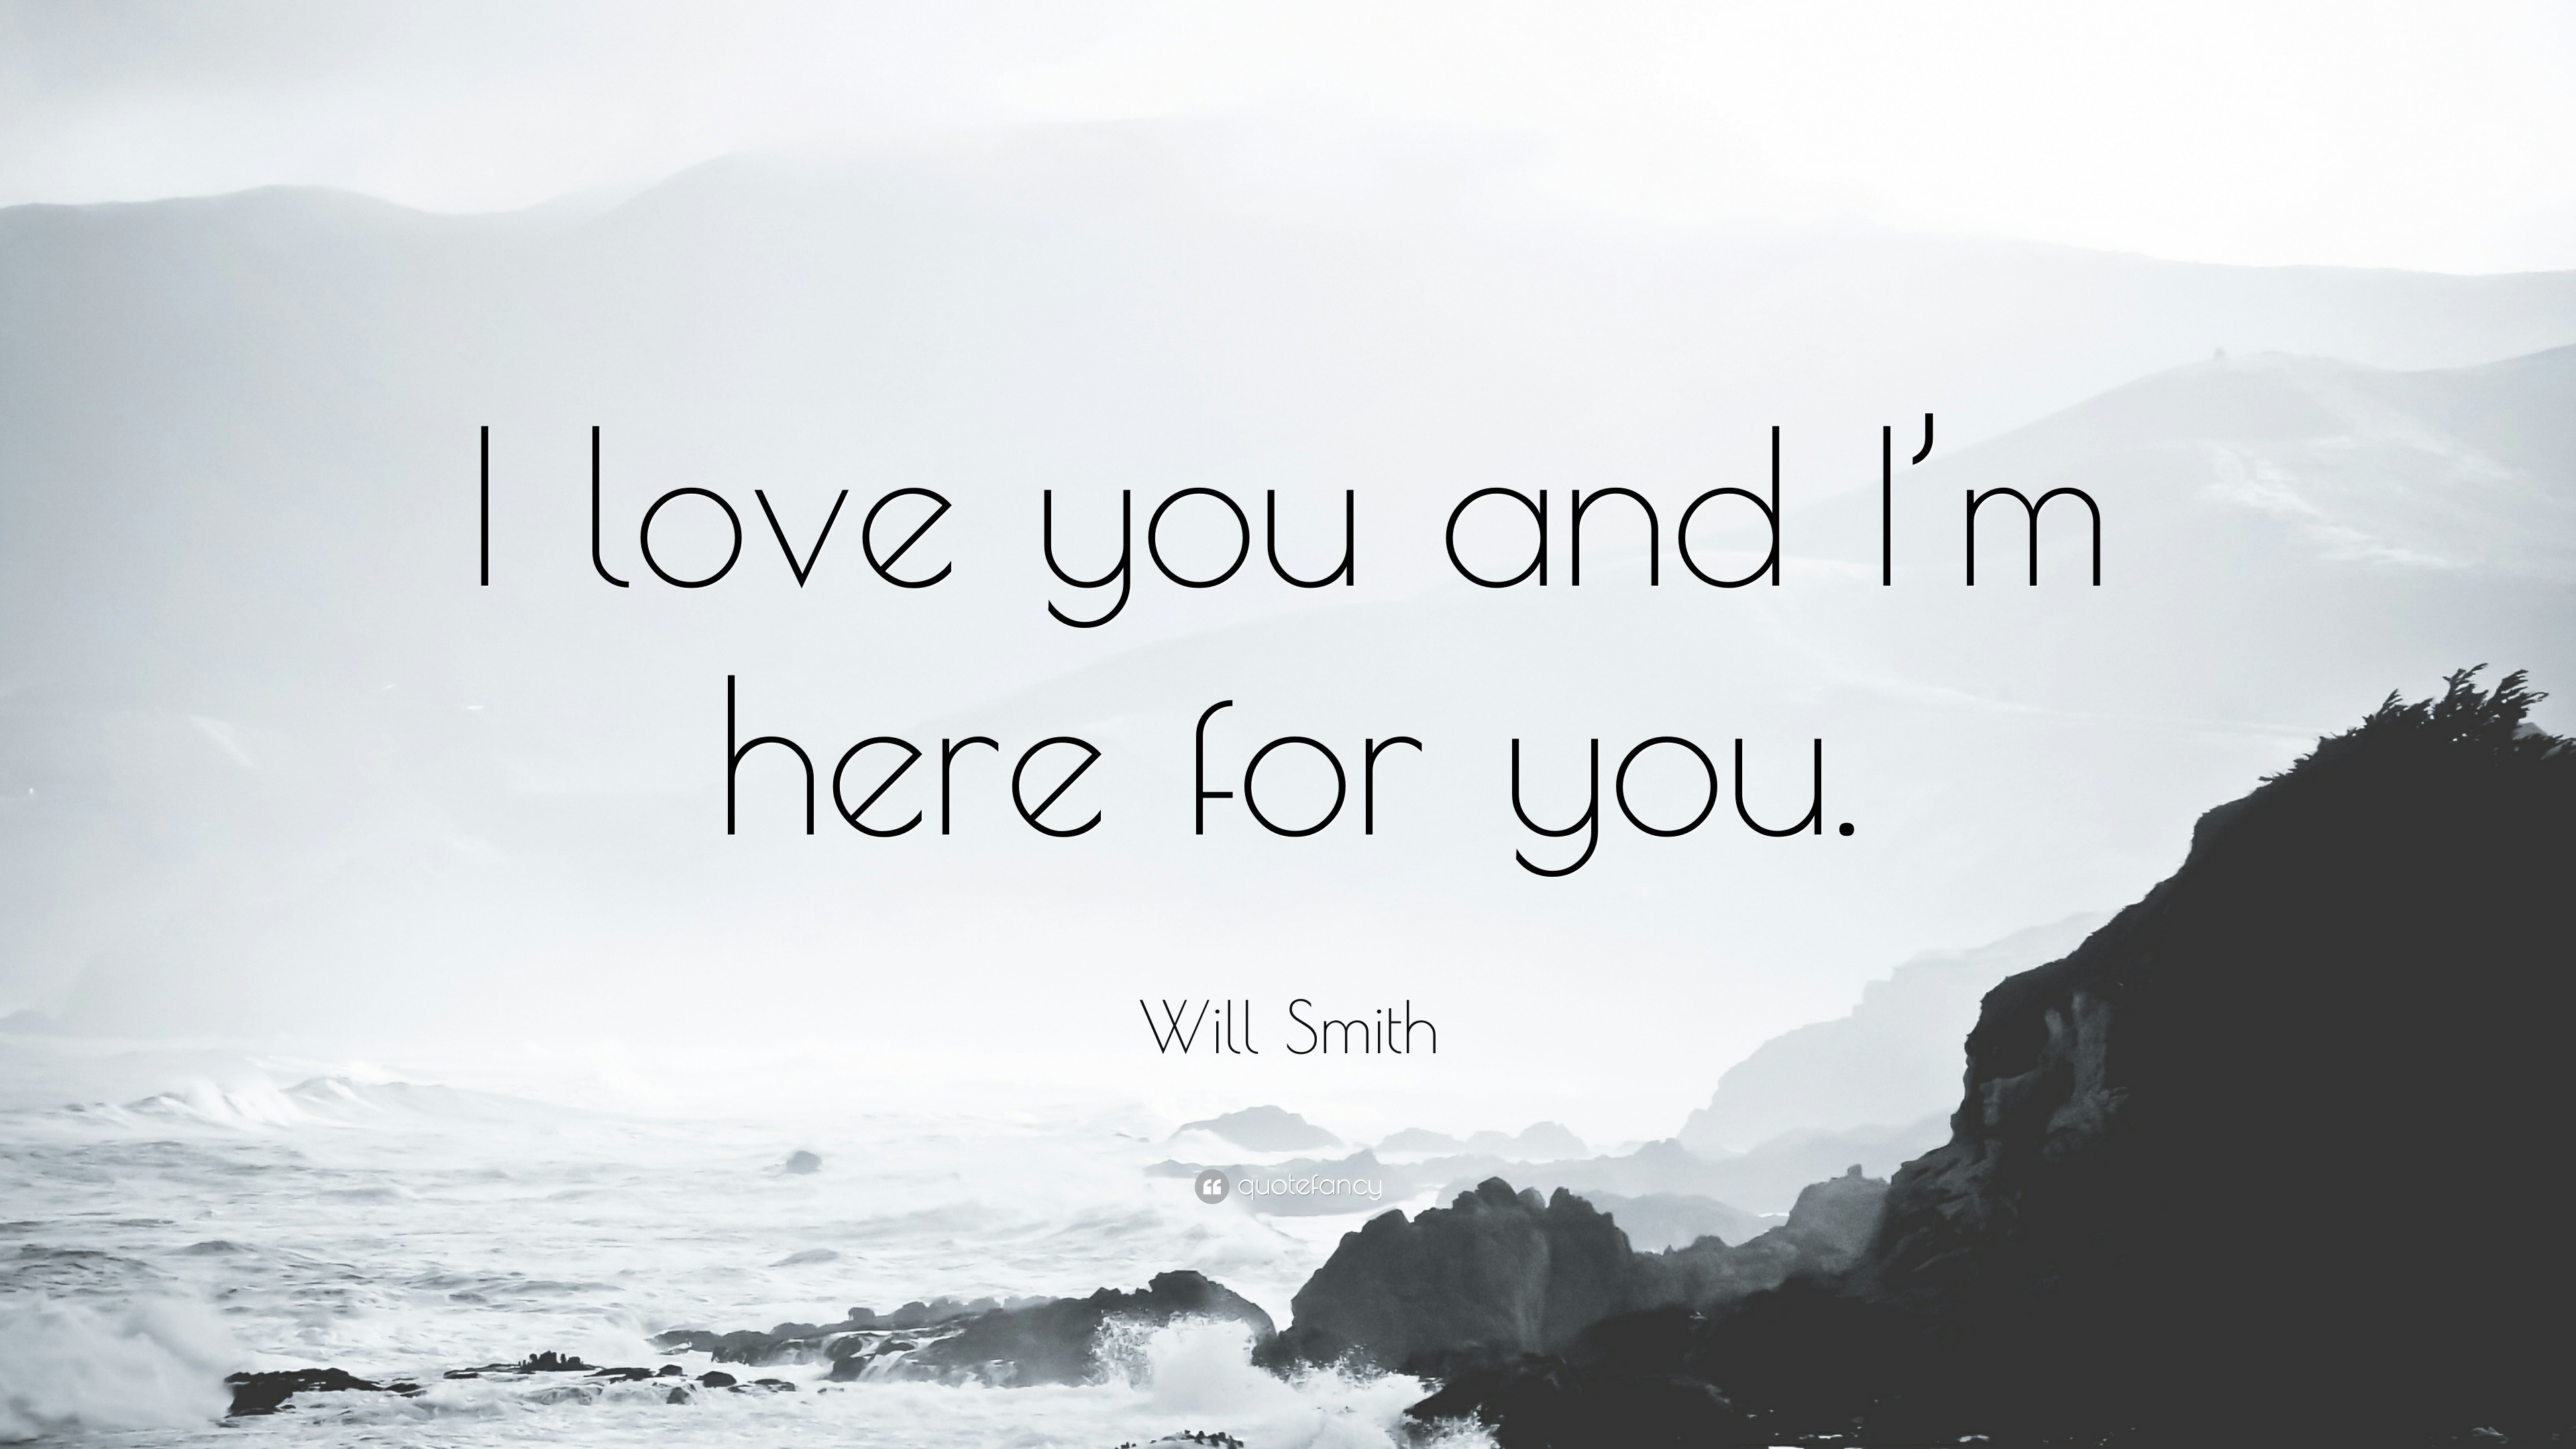 Will Smith Quote: "I love you and I'm here for you." (12 wallpapers) - Quotefancy